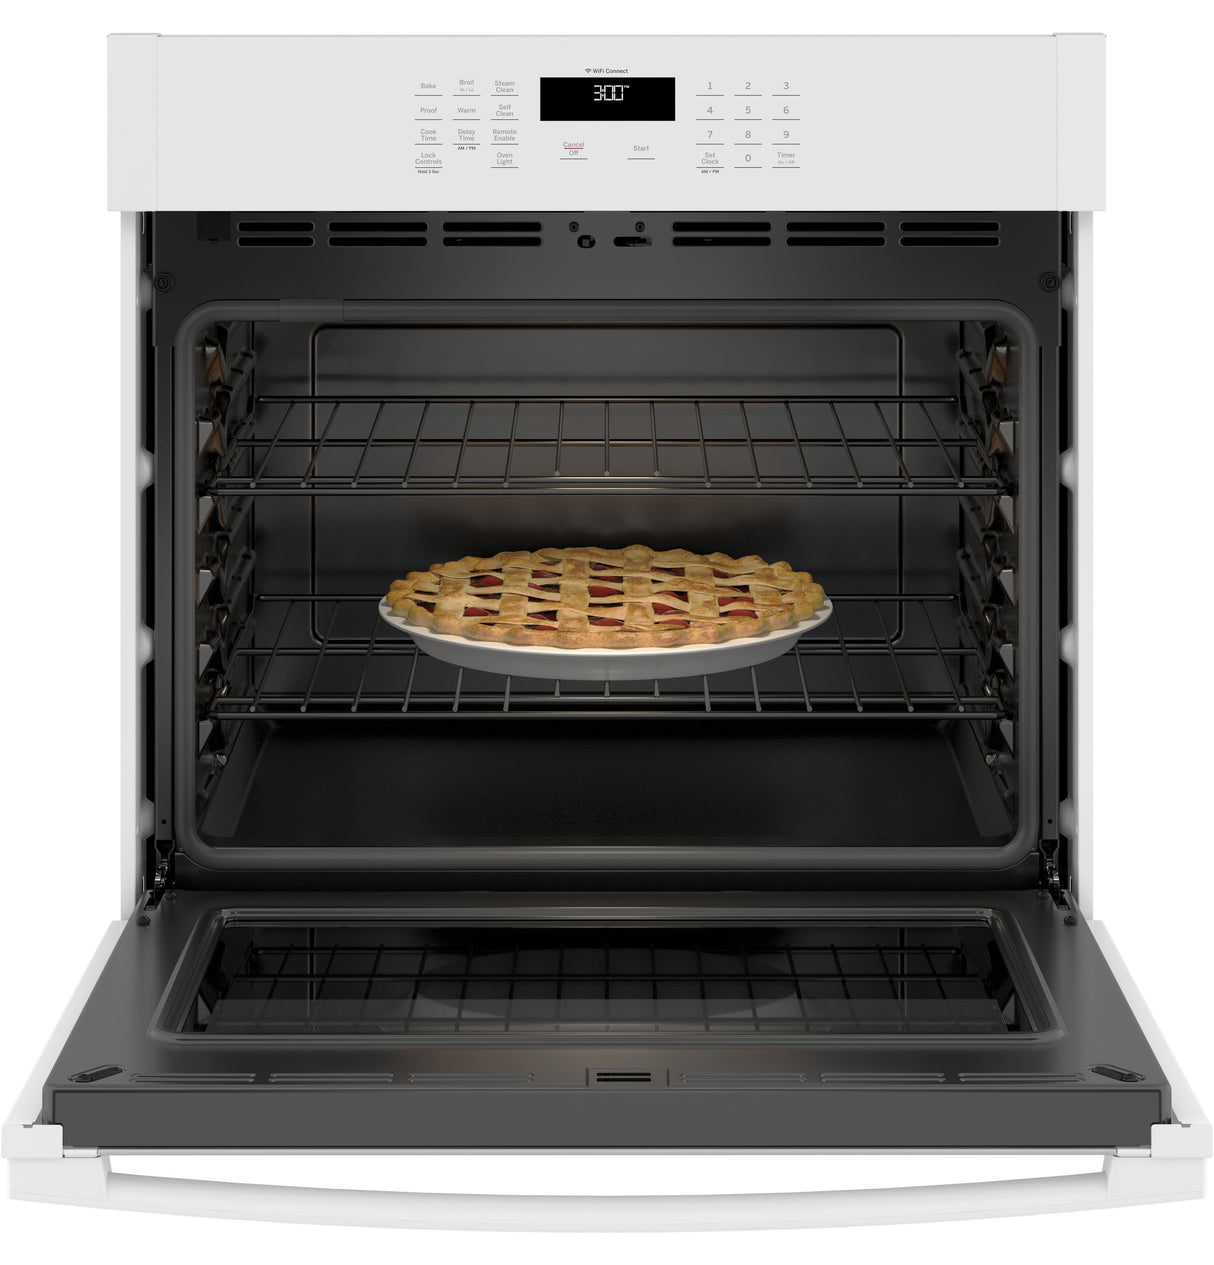 GE(R) 30" Smart Built-In Self-Clean Single Wall Oven with Never-Scrub Racks - (JTS3000DNWW)